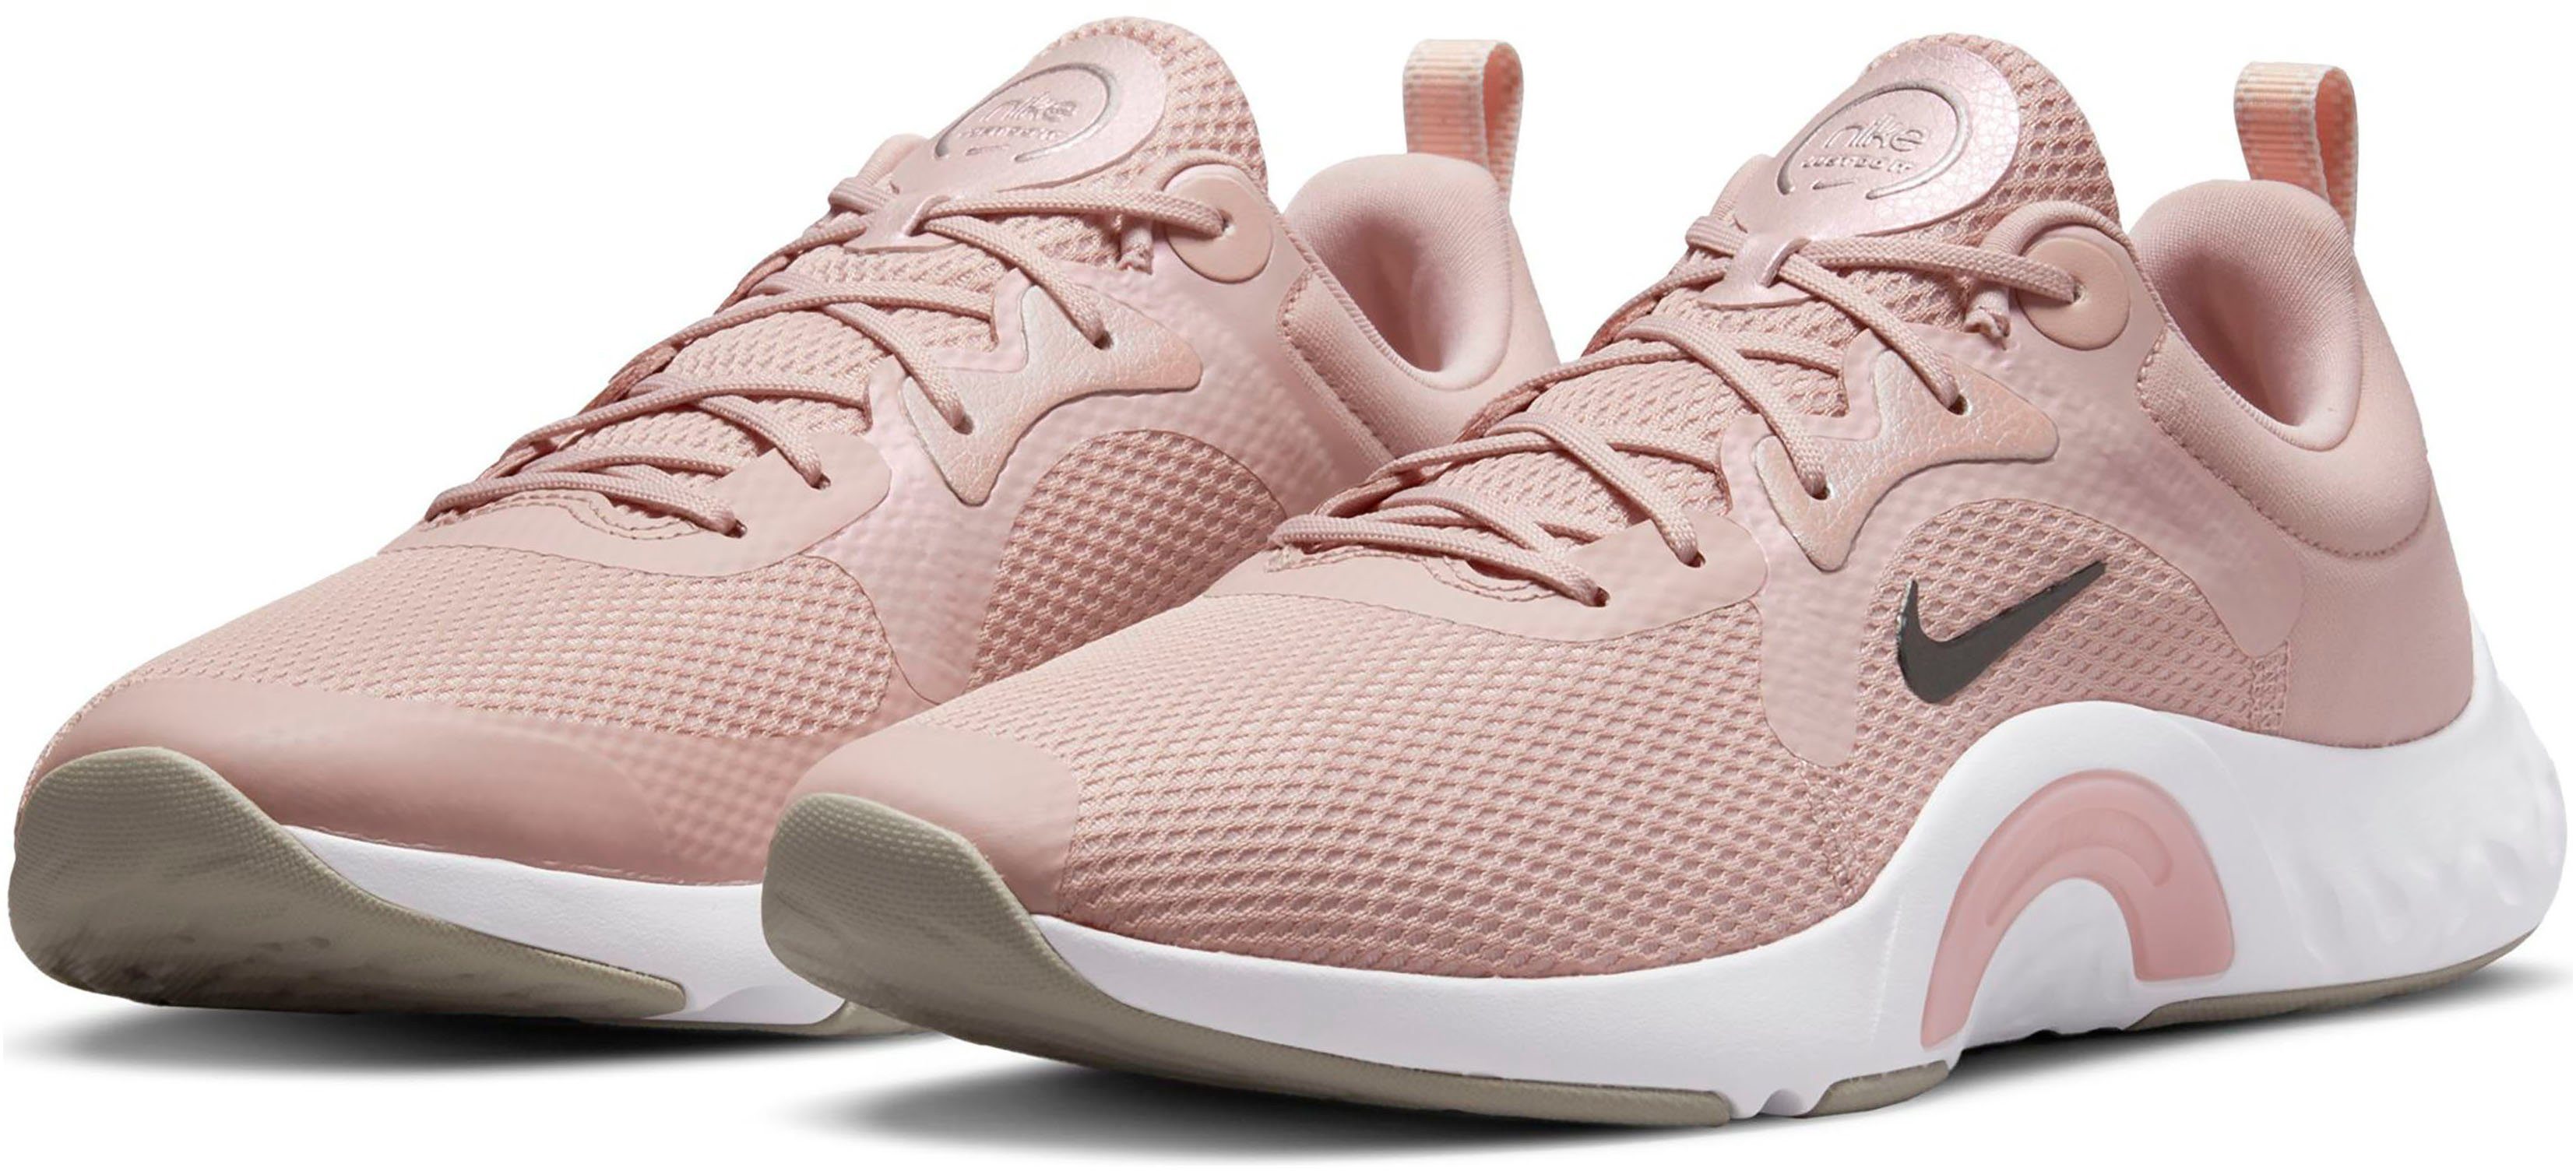 Nike RENEW IN-SEASON TR 11 PINK-OXFORD-MTLC-PEWTER-PALE-CORAL-WHITE Fitnessschuh